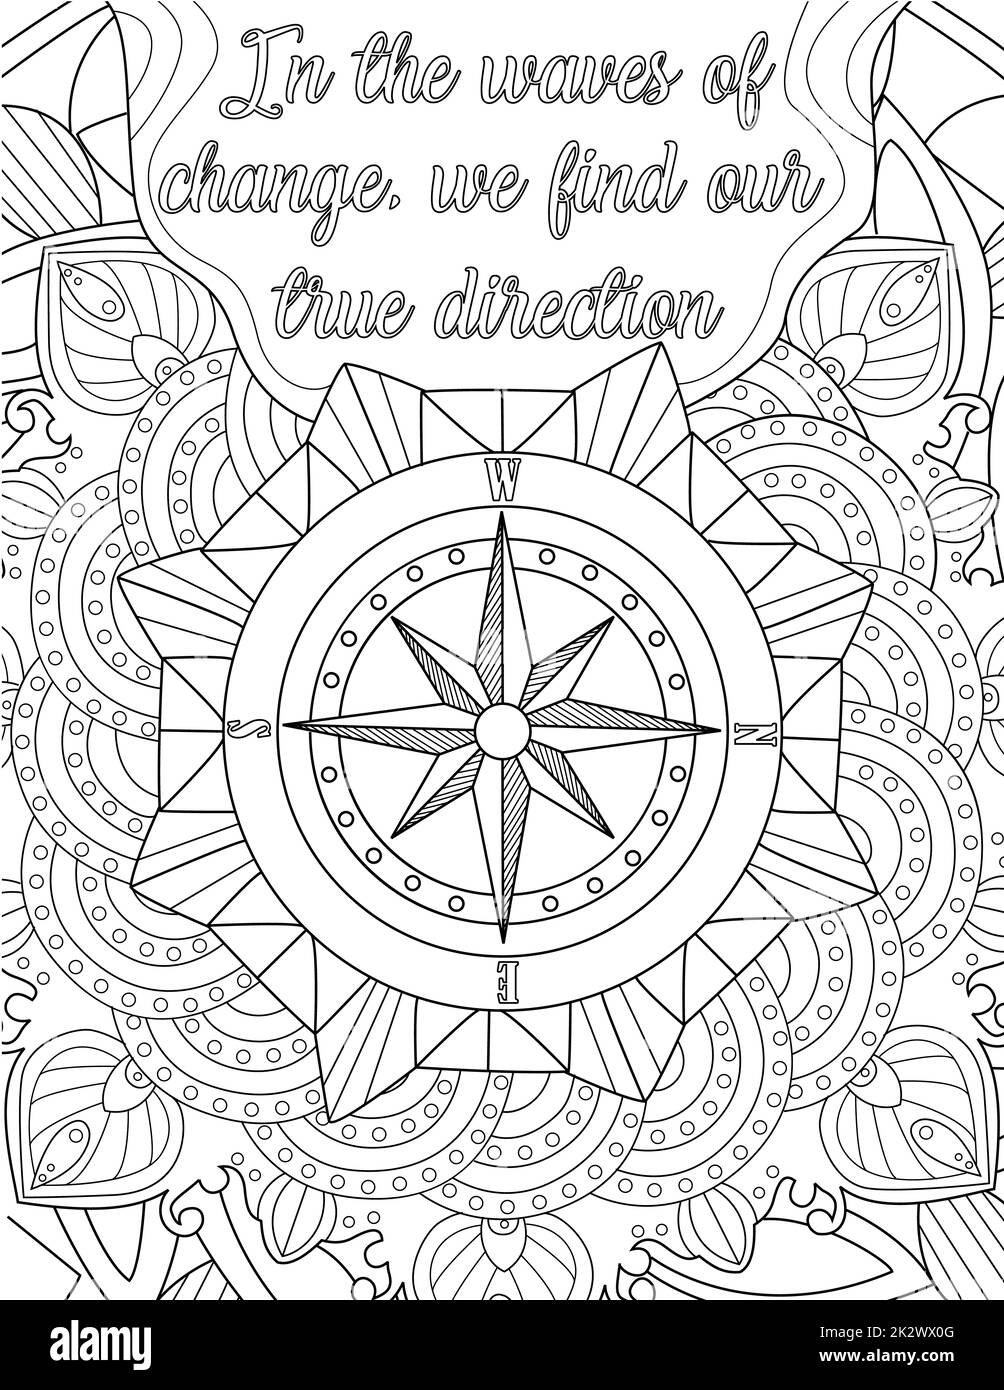 A Large Compass Drawing Is Tilted Under Inspirational Vibe Message. Beautiful Positive Vibe Letter Written In The Waves Of Change, We Find Our True Direction. Stock Photo